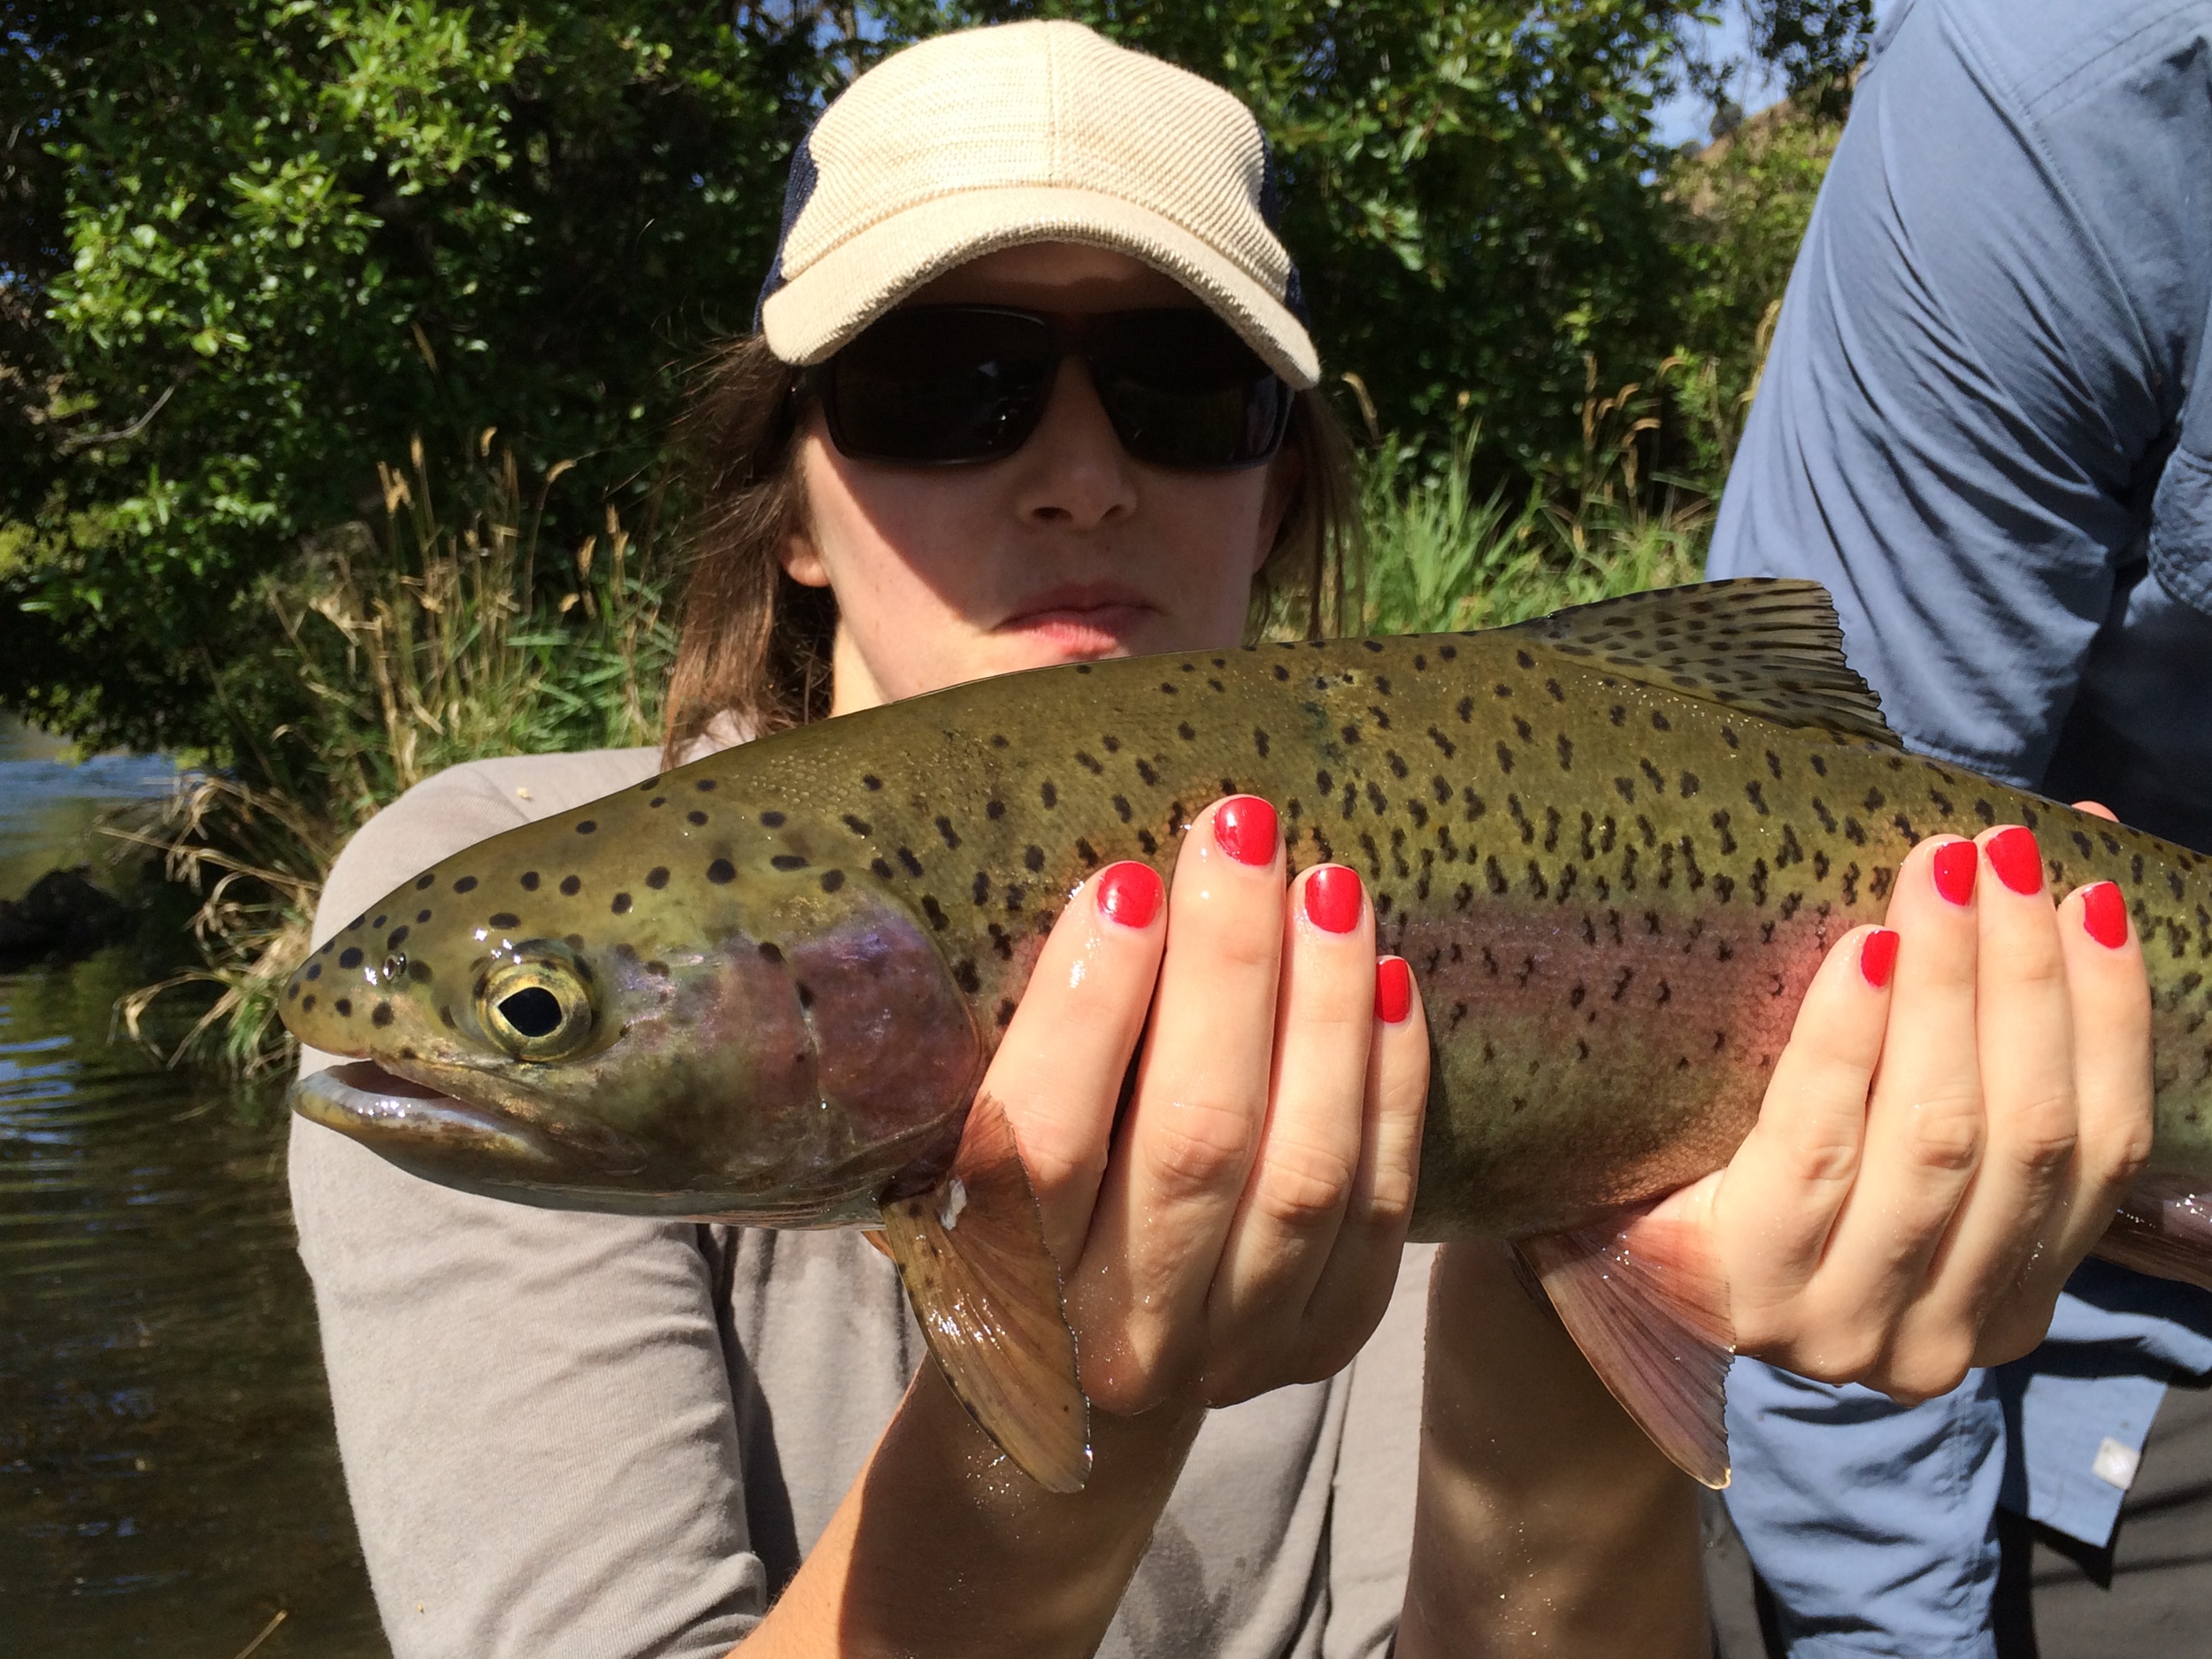  Heather' first fly caught fish! &nbsp;She has hooked a few trout on some other rivers so it is ironic that her first landed trout was a badass Deschutes redside! 